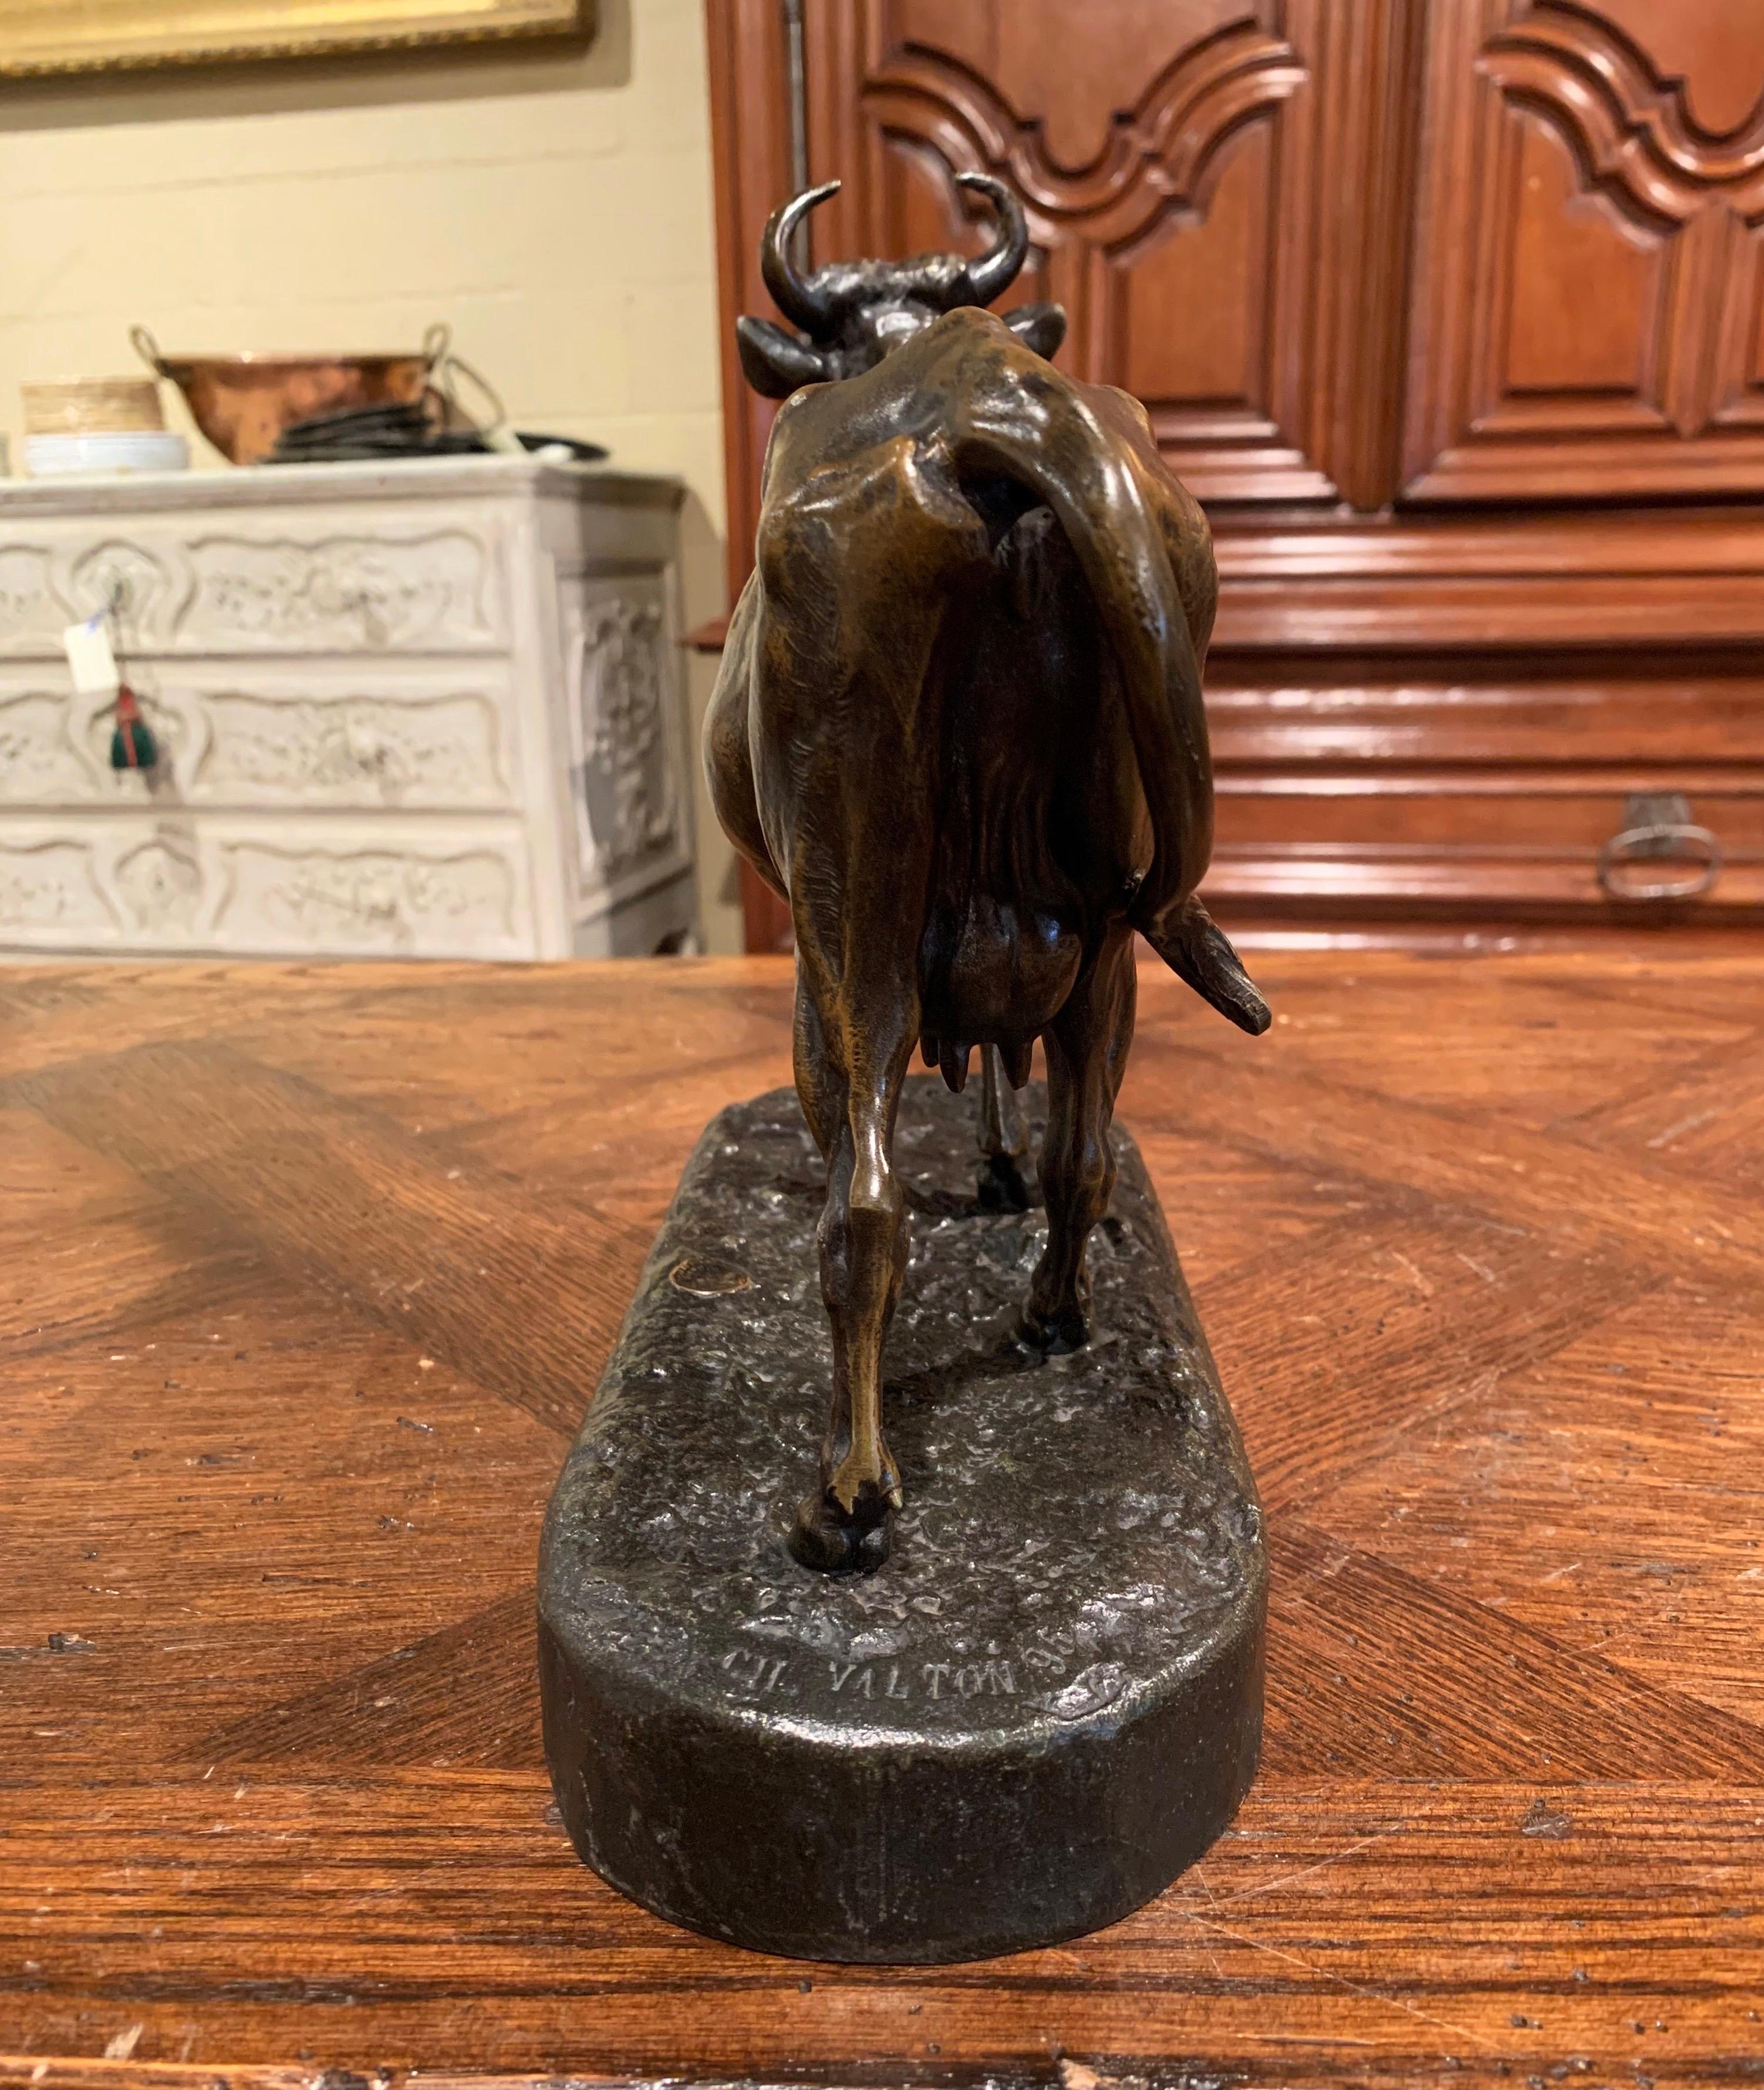 19th Century French Patinated Spelter Cow Sculpture Signed Charles Valton 2